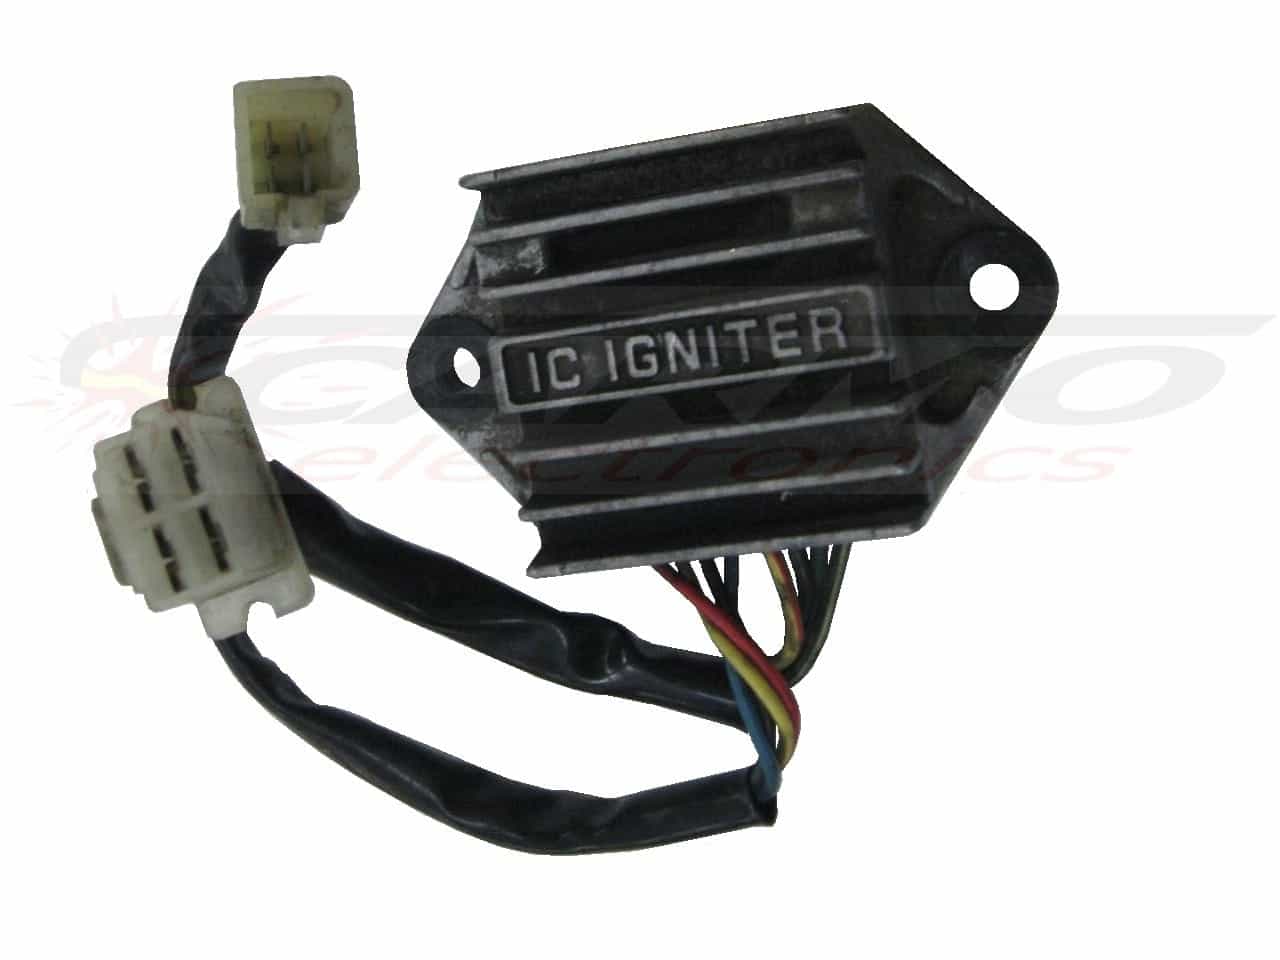 Z550A2 CDI computer controller IC igniter